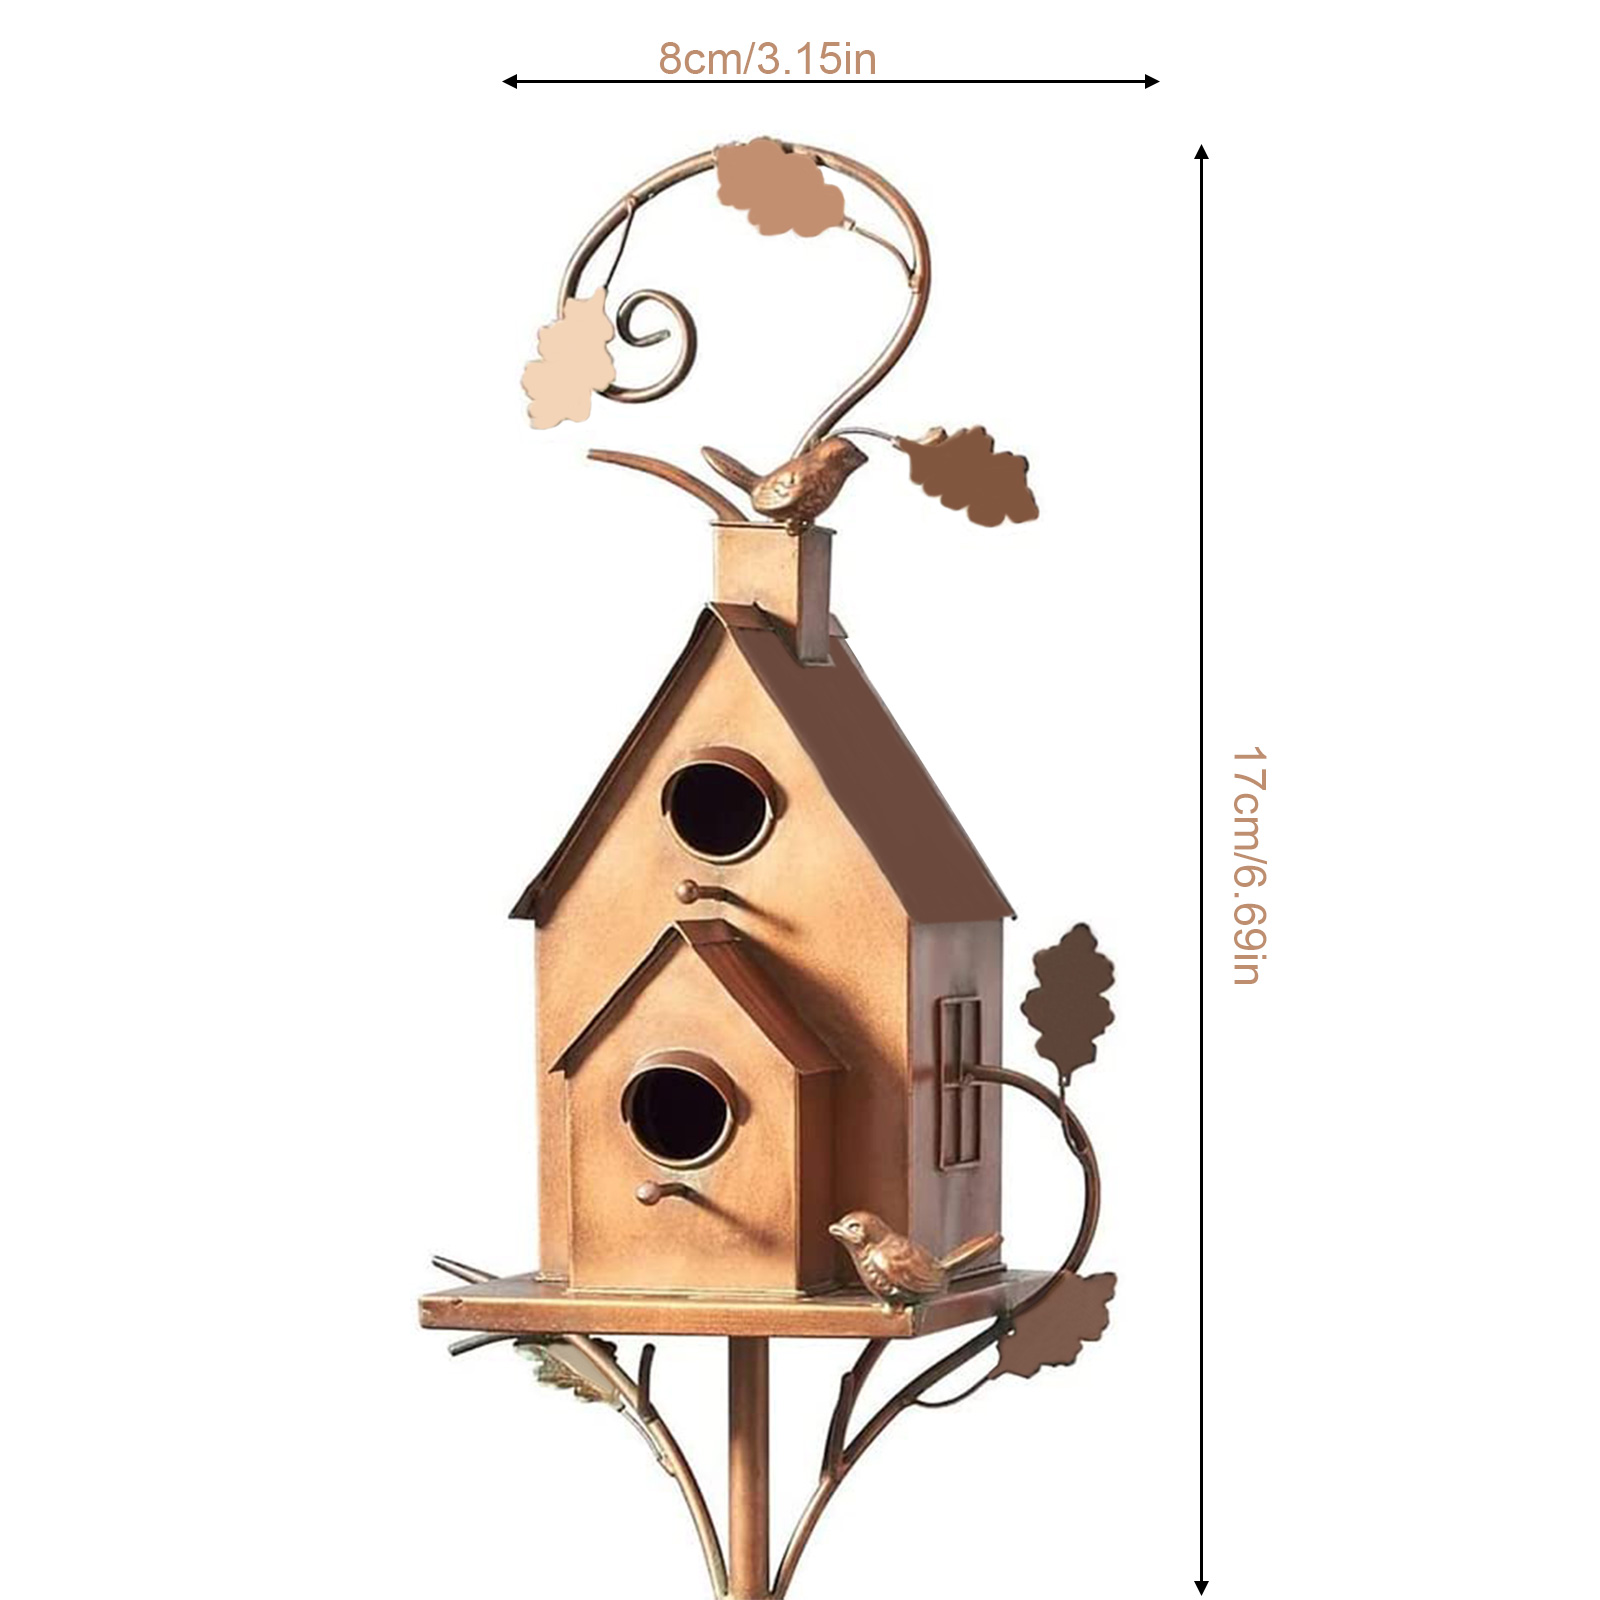 Asdomo Metal Birdhouse Garden Stakes Bird's Nest Multi-size Yellow Easy To Assemble Resting Place For Birds - image 2 of 9